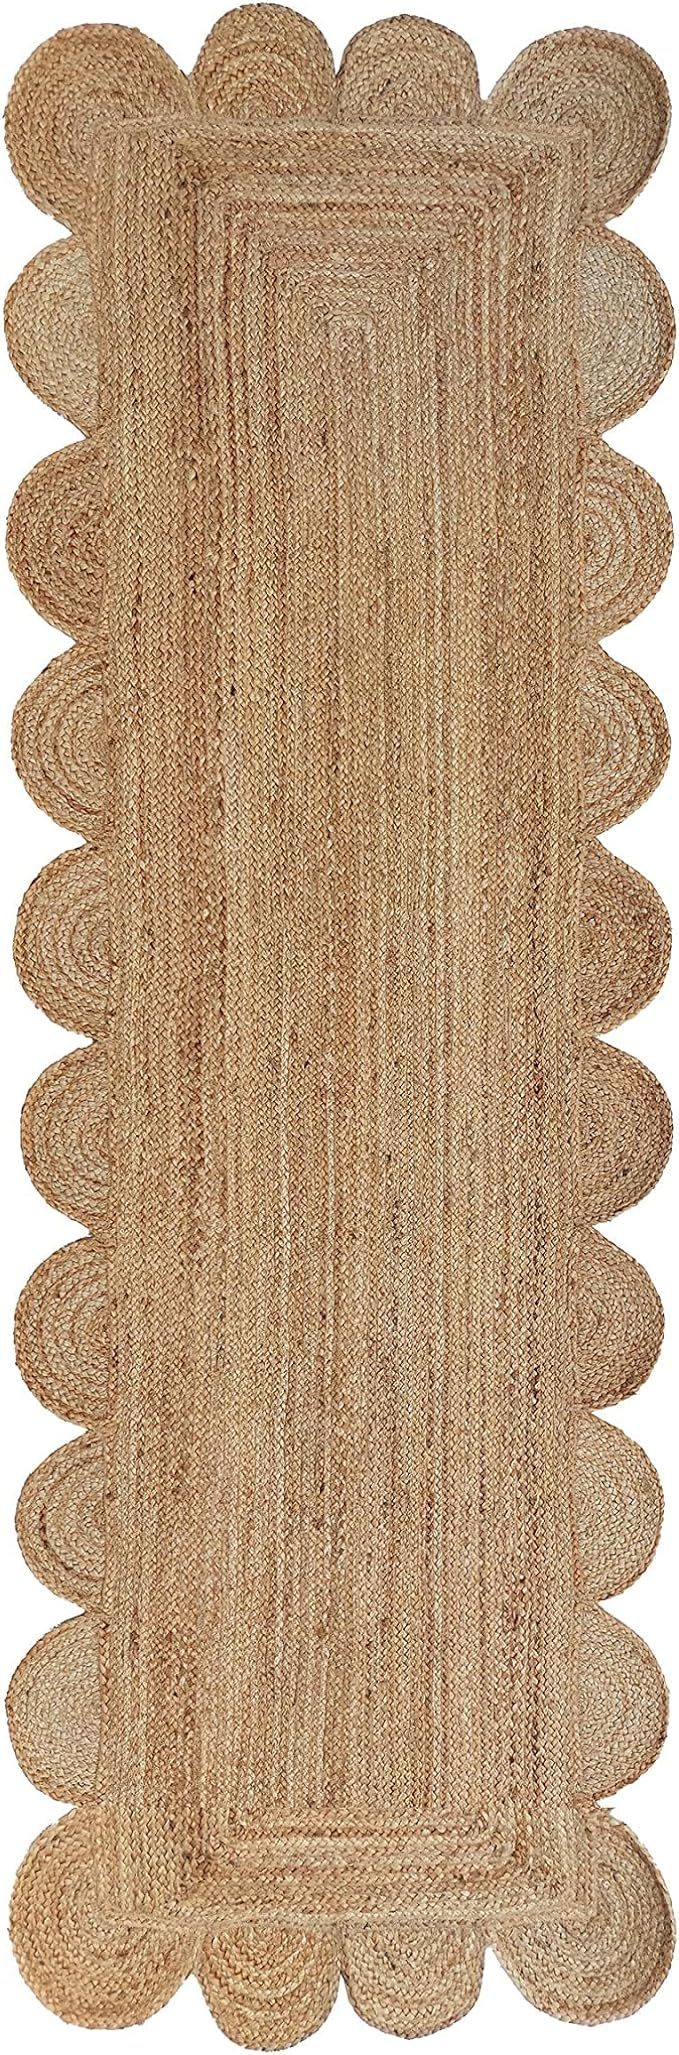 Scalloped Natural Jute Area Rug, Natural Color (2'6"X8') | Amazon (US)